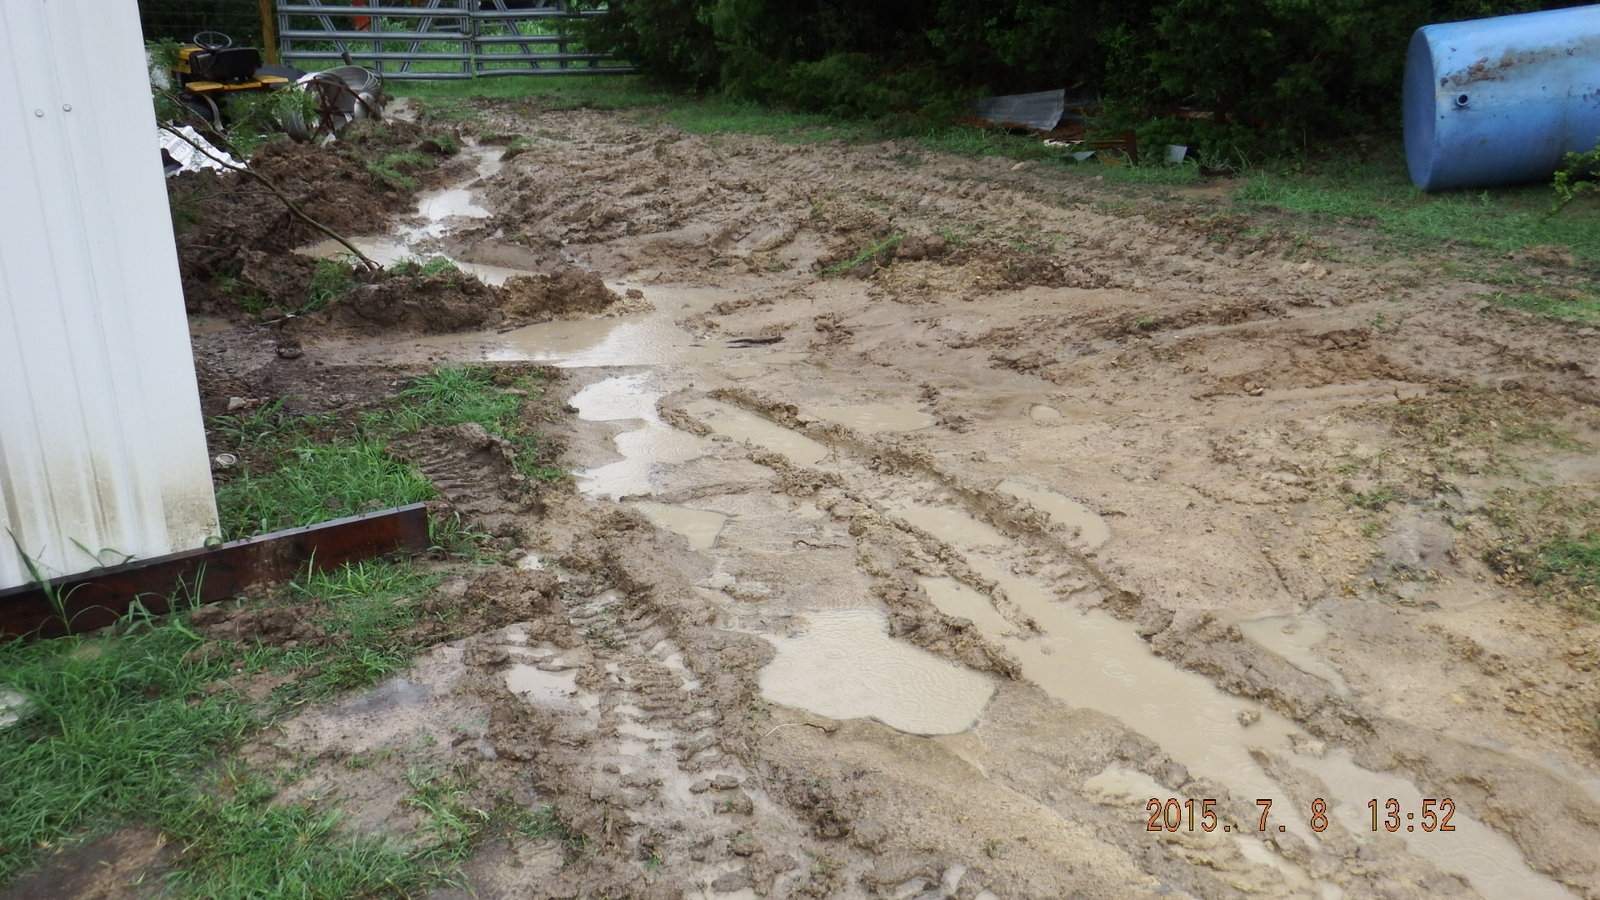 7_8_2015 4 Emergency drainage from 7 inches of rain.JPG